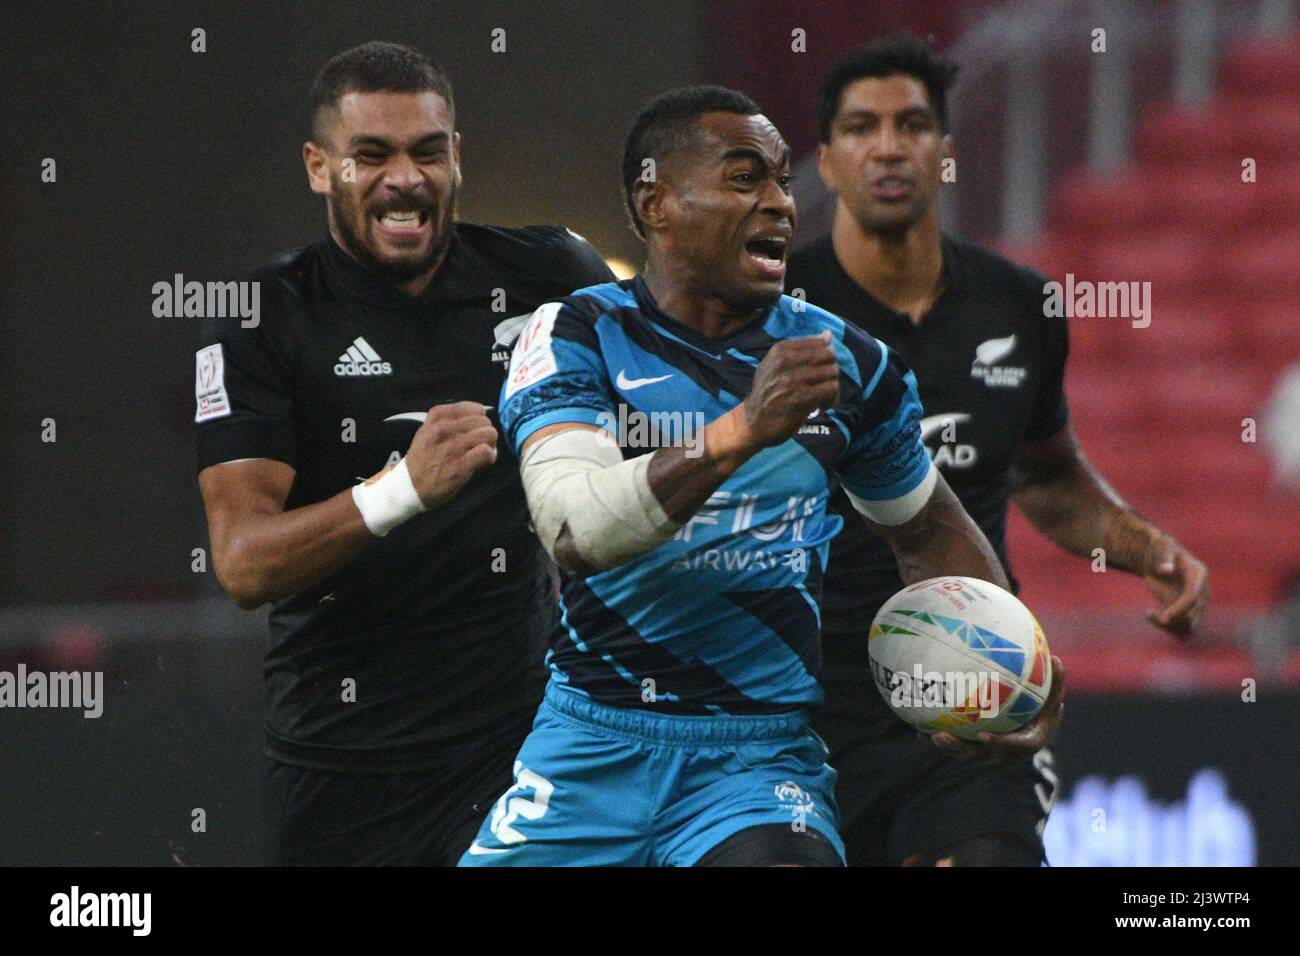 Singapore. 10th Apr, 2022. Vuiviawa Naduvalo (C) of Fiji competes during the final between New Zealand and Fiji at the HSBC World Rugby Sevens Singapore stop, held in the National Stadium on April 10, 2022. Credit: Then Chih Wey/Xinhua/Alamy Live News Stock Photo